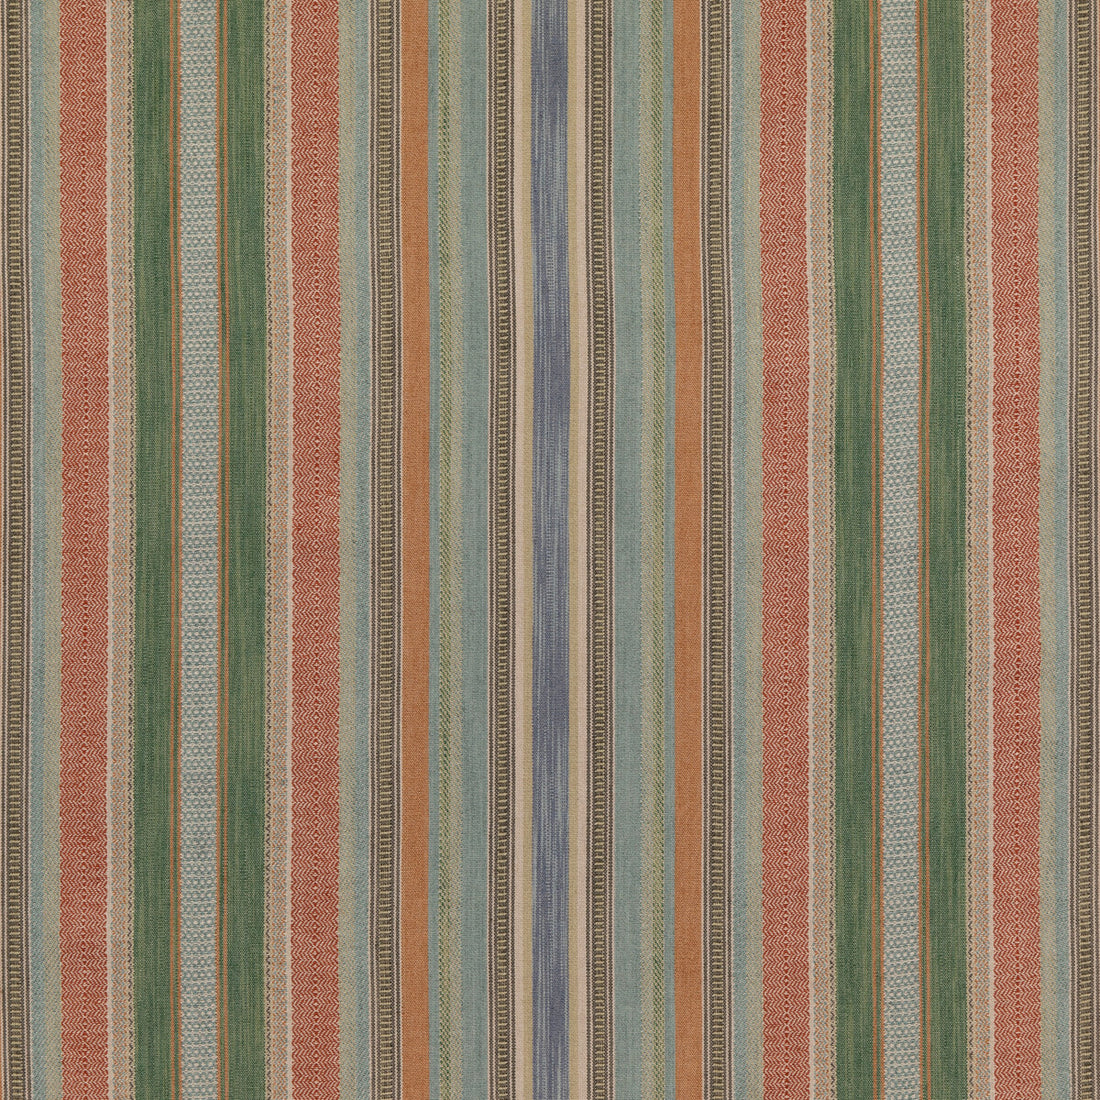 Rustic Stripe fabric in spice color - pattern FD784.T30.0 - by Mulberry in the Modern Country I collection